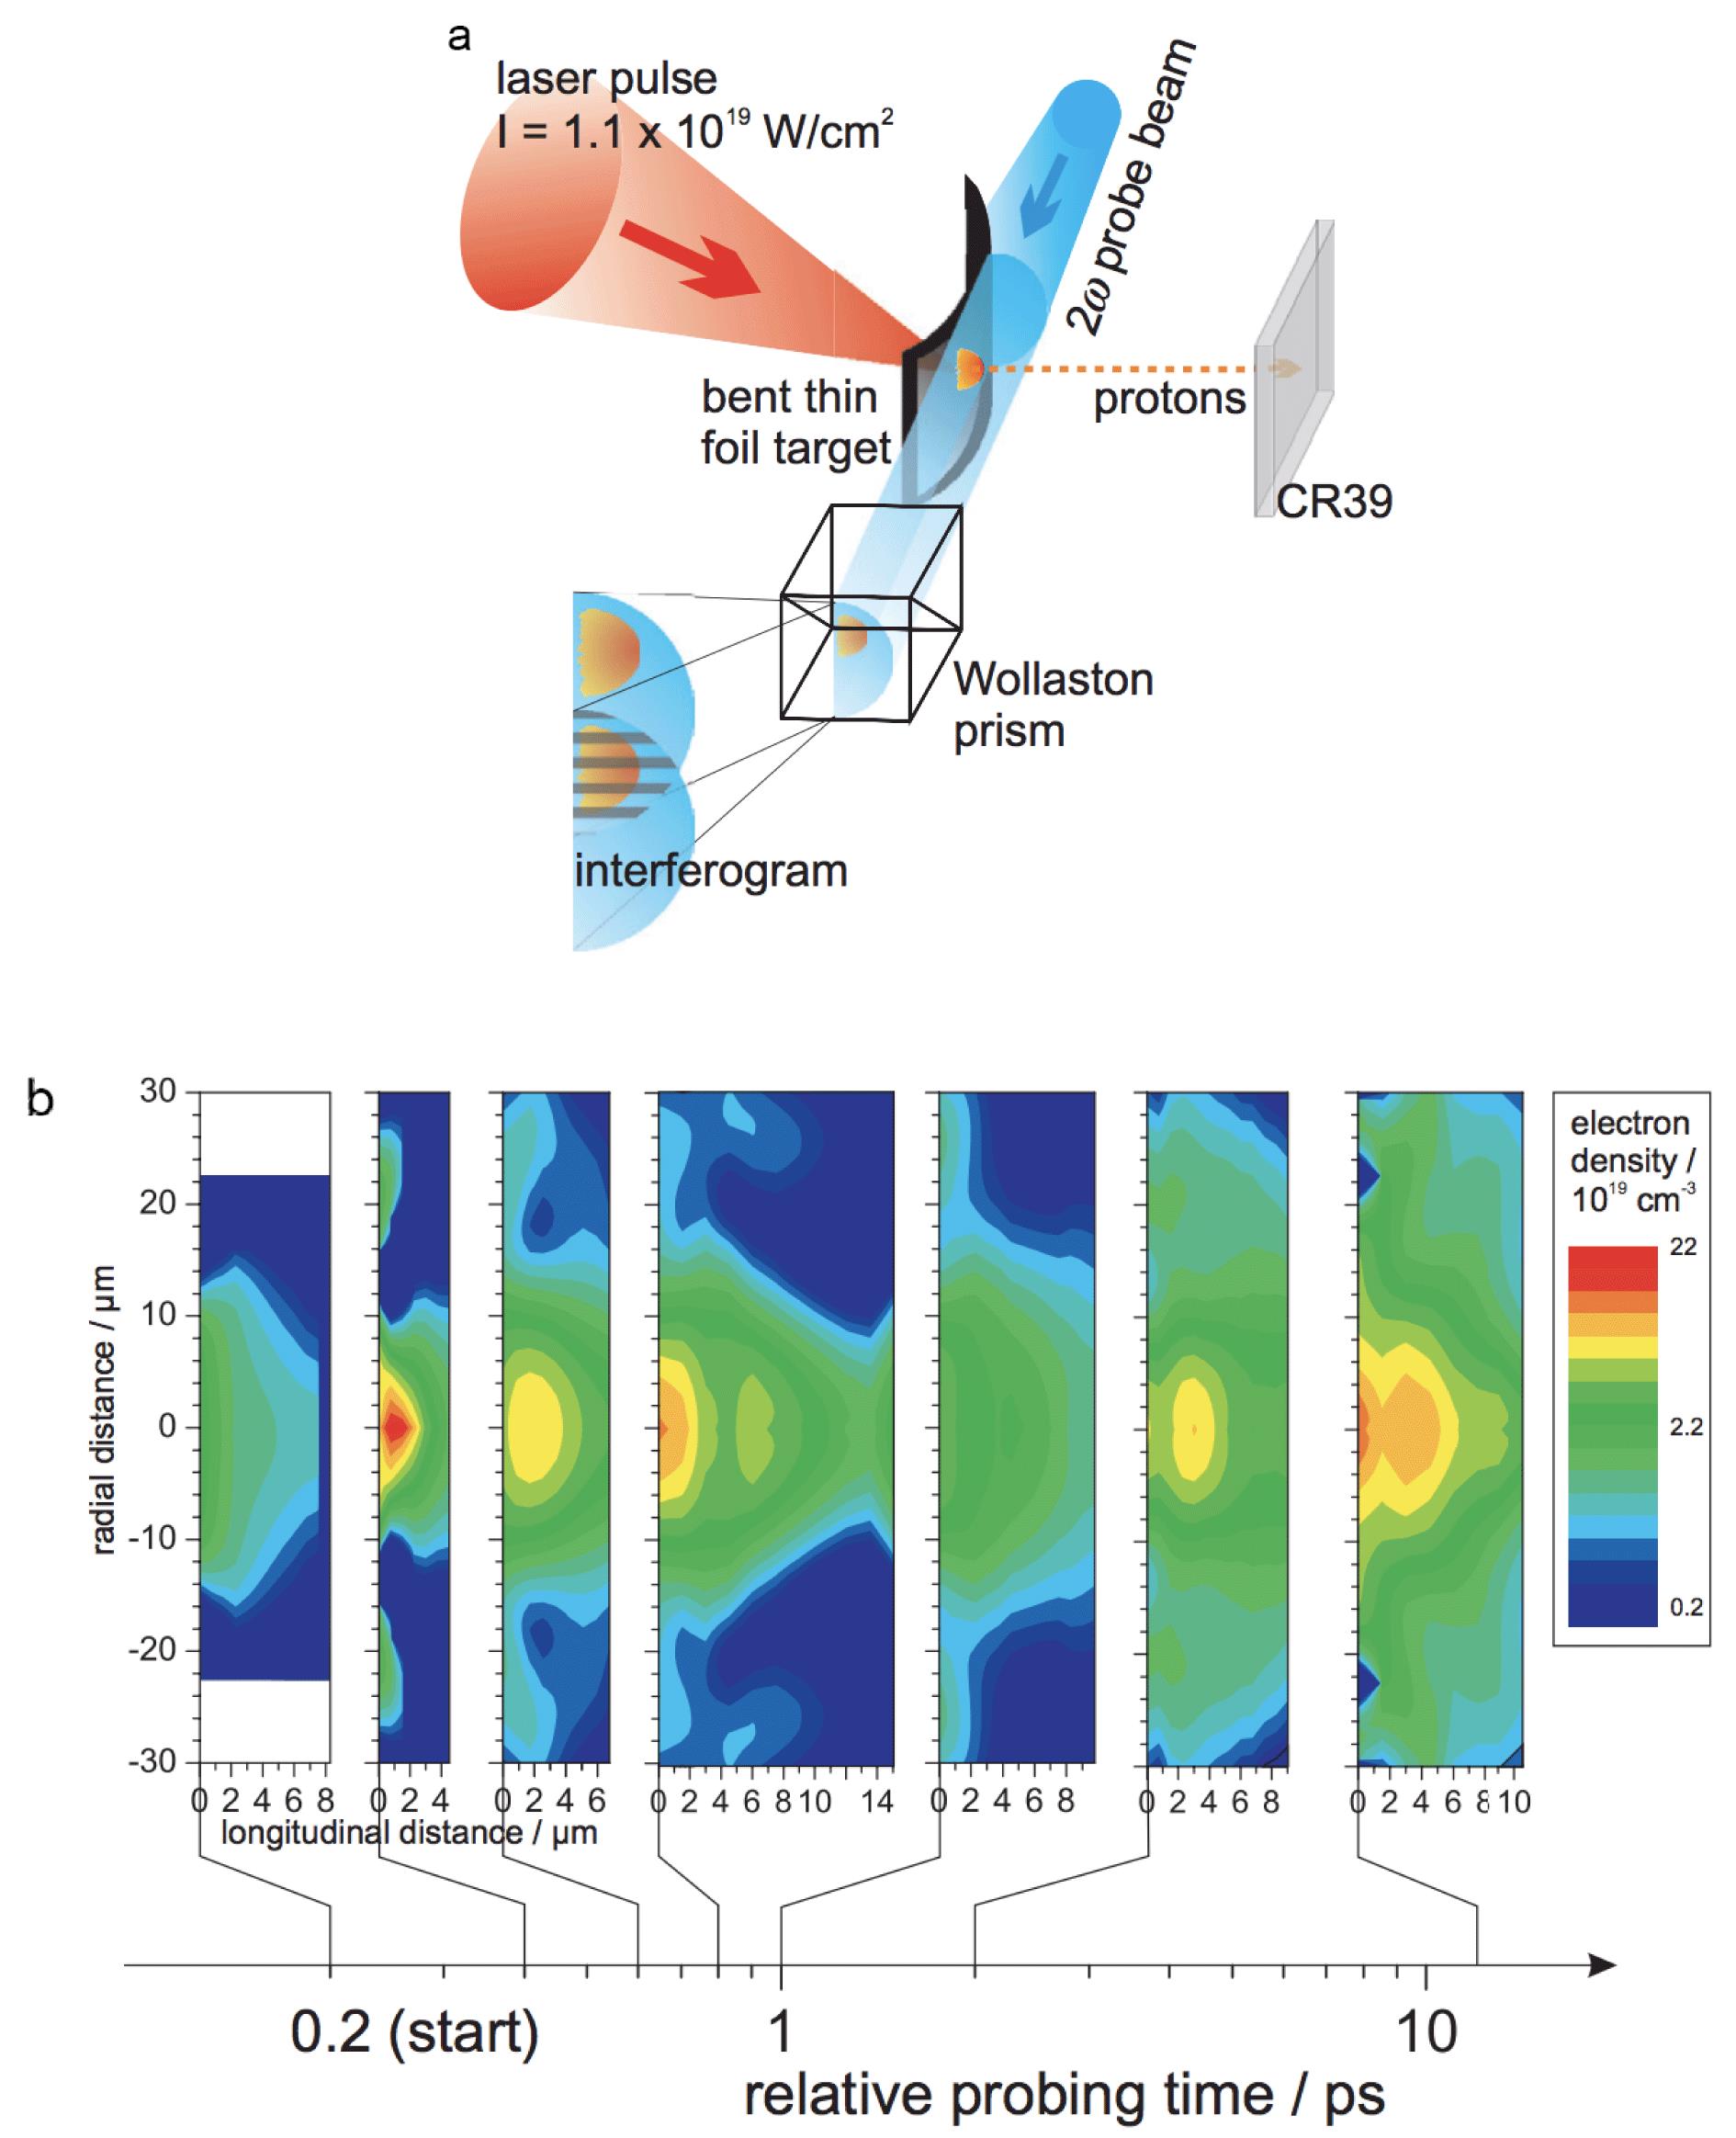 Electron density interferometric measurement. (a) Schematic overview of the experimental diagnostic setup. (b) Temporal evolution of the electron density at the rear surface of the target. All pictures are shifted +200 fs due to the logarithmic timescale. Figure from Ref. [24].